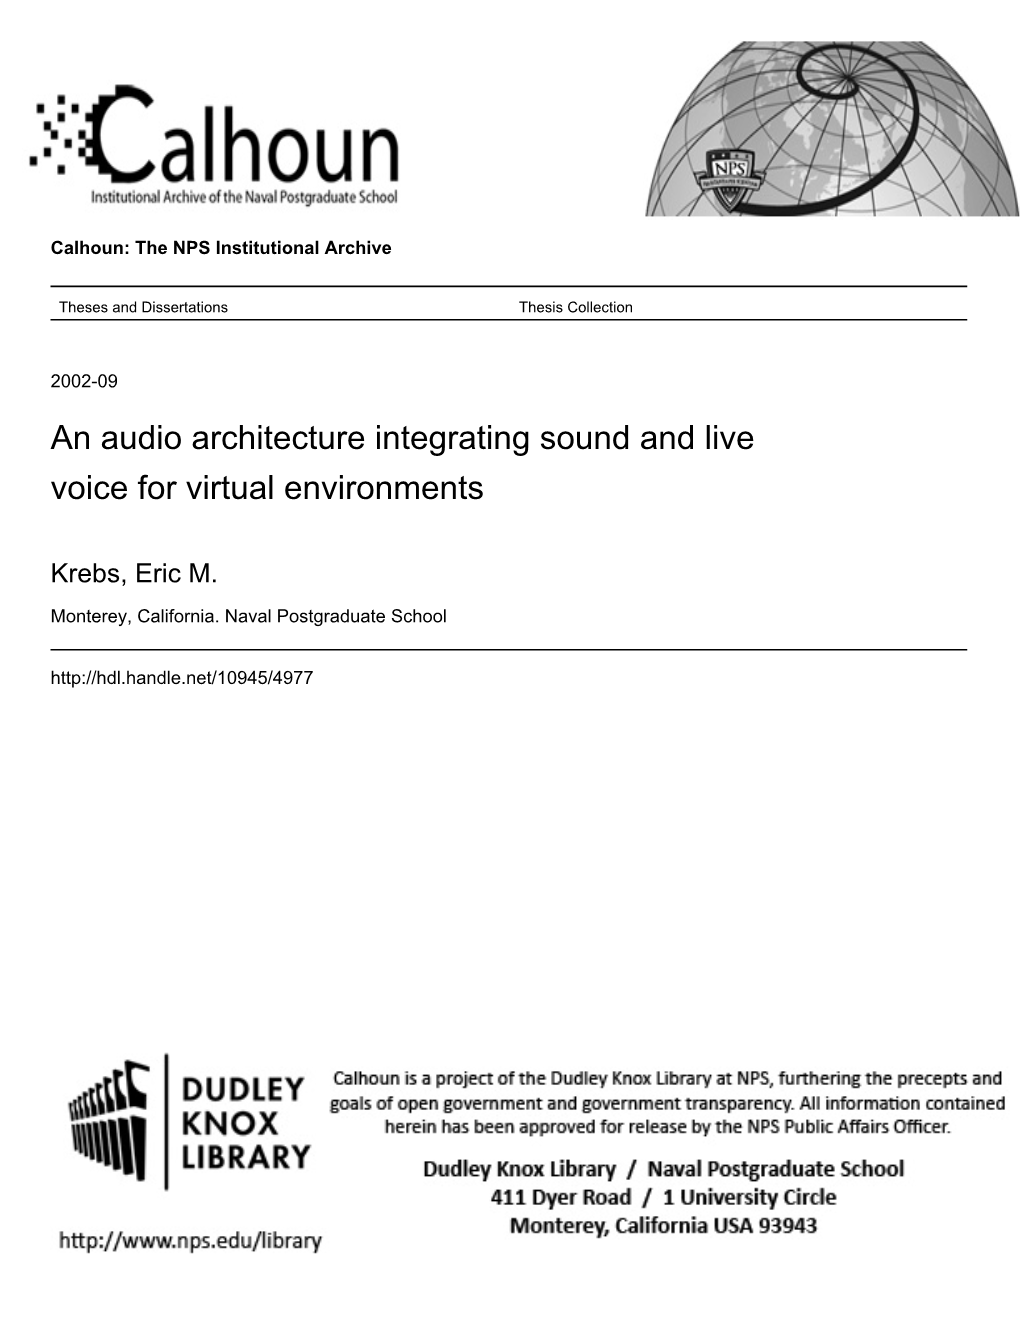 An Audio Architecture Integrating Sound and Live Voice for Virtual Environments